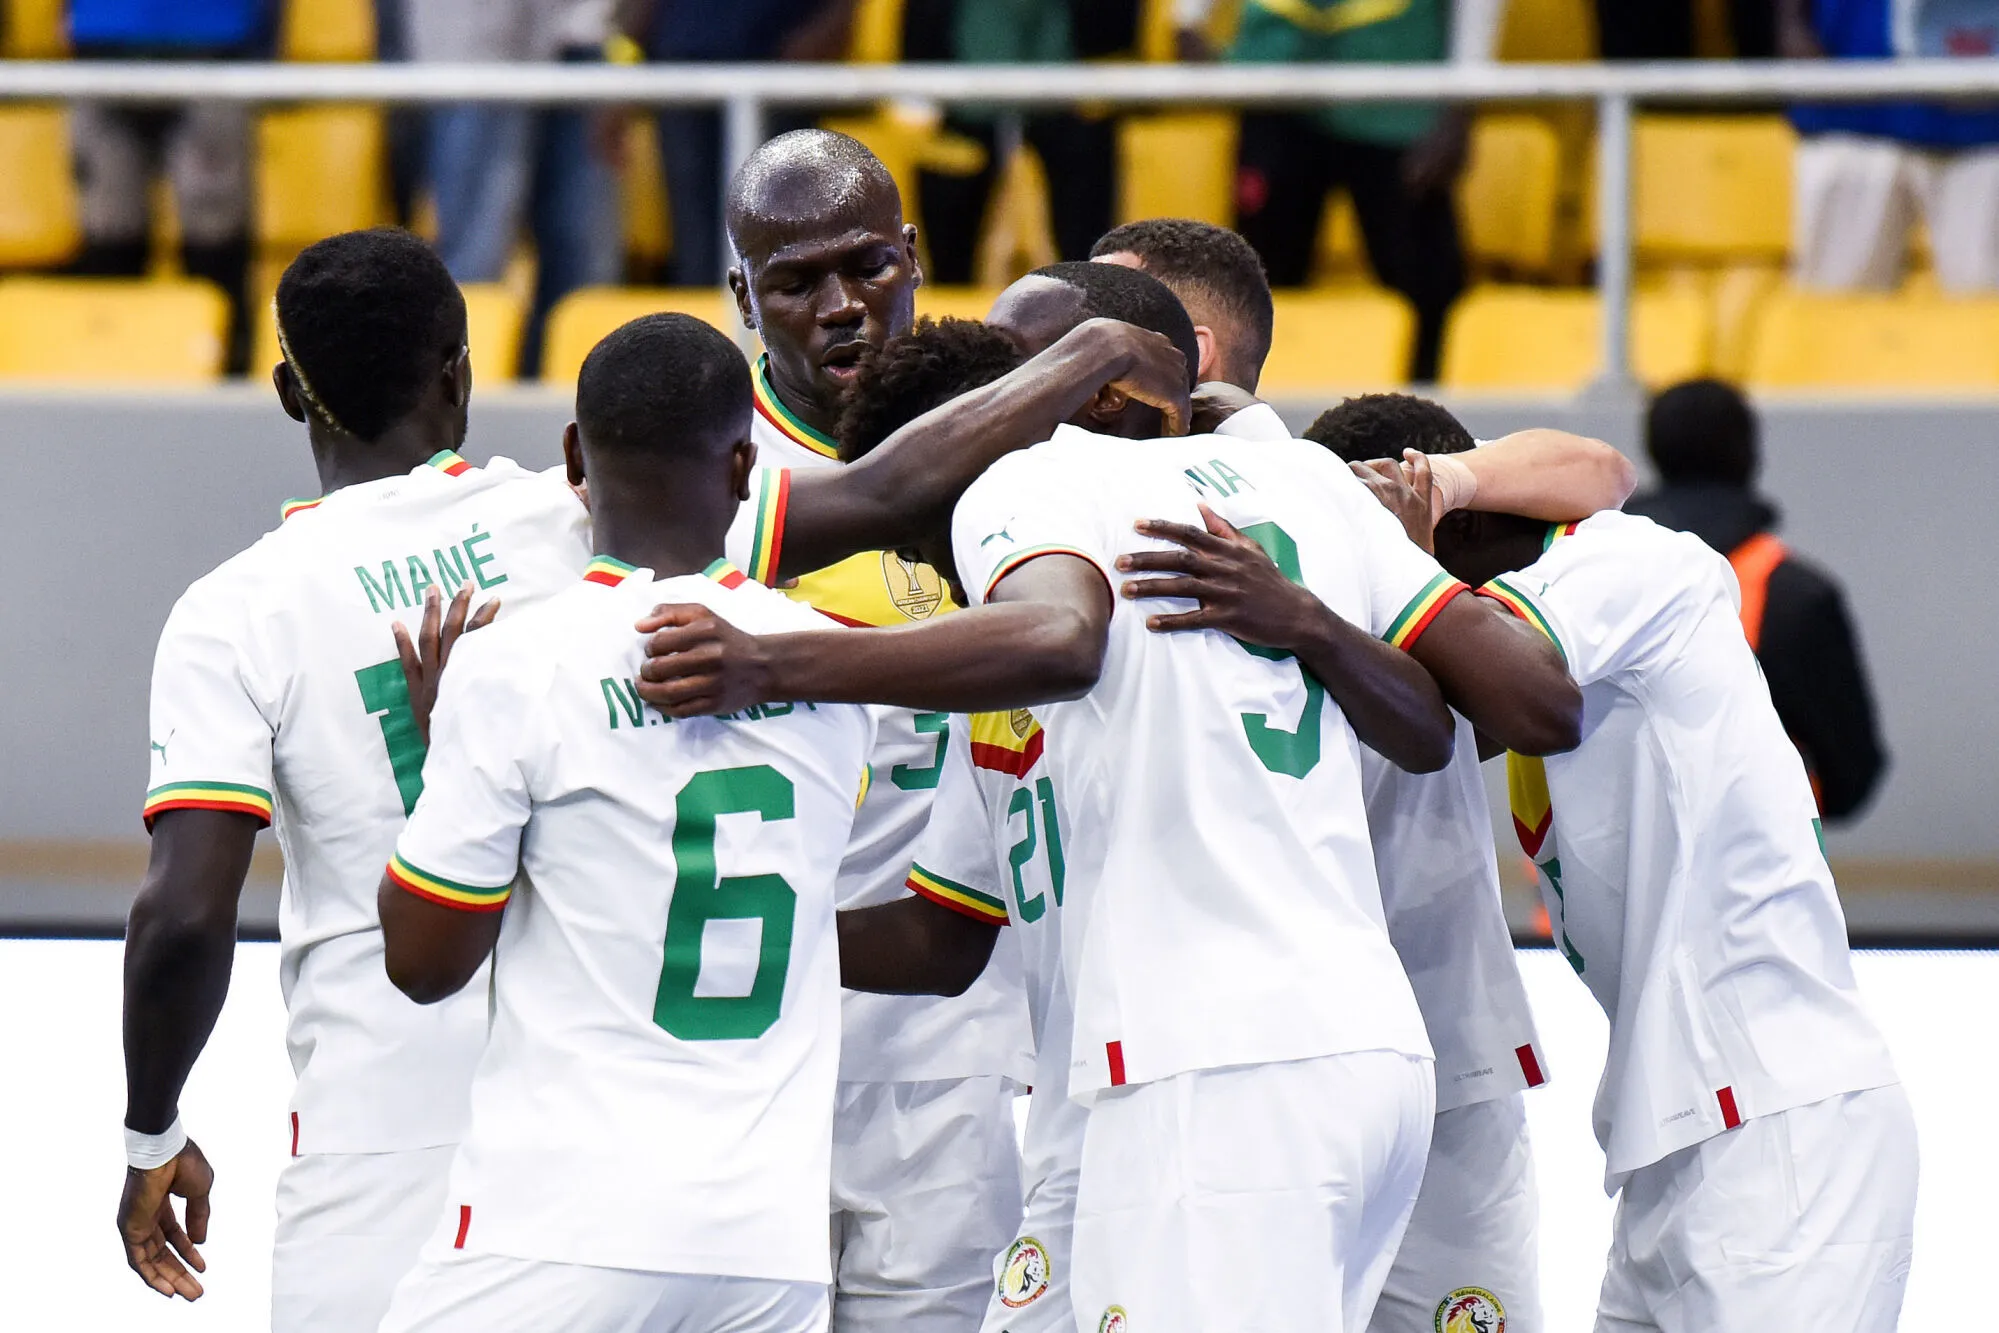 Boulaye Dia of Senegal is congratulated for scoring a goal during the 2023 Africa Cup of Nations Qualifying match between Senegal and Mozambique held at the Me Abdoulaye Wade Stadium in Diamniadio, Senegal on 24 March 2023 ©Sports Inc - Photo by Icon sport